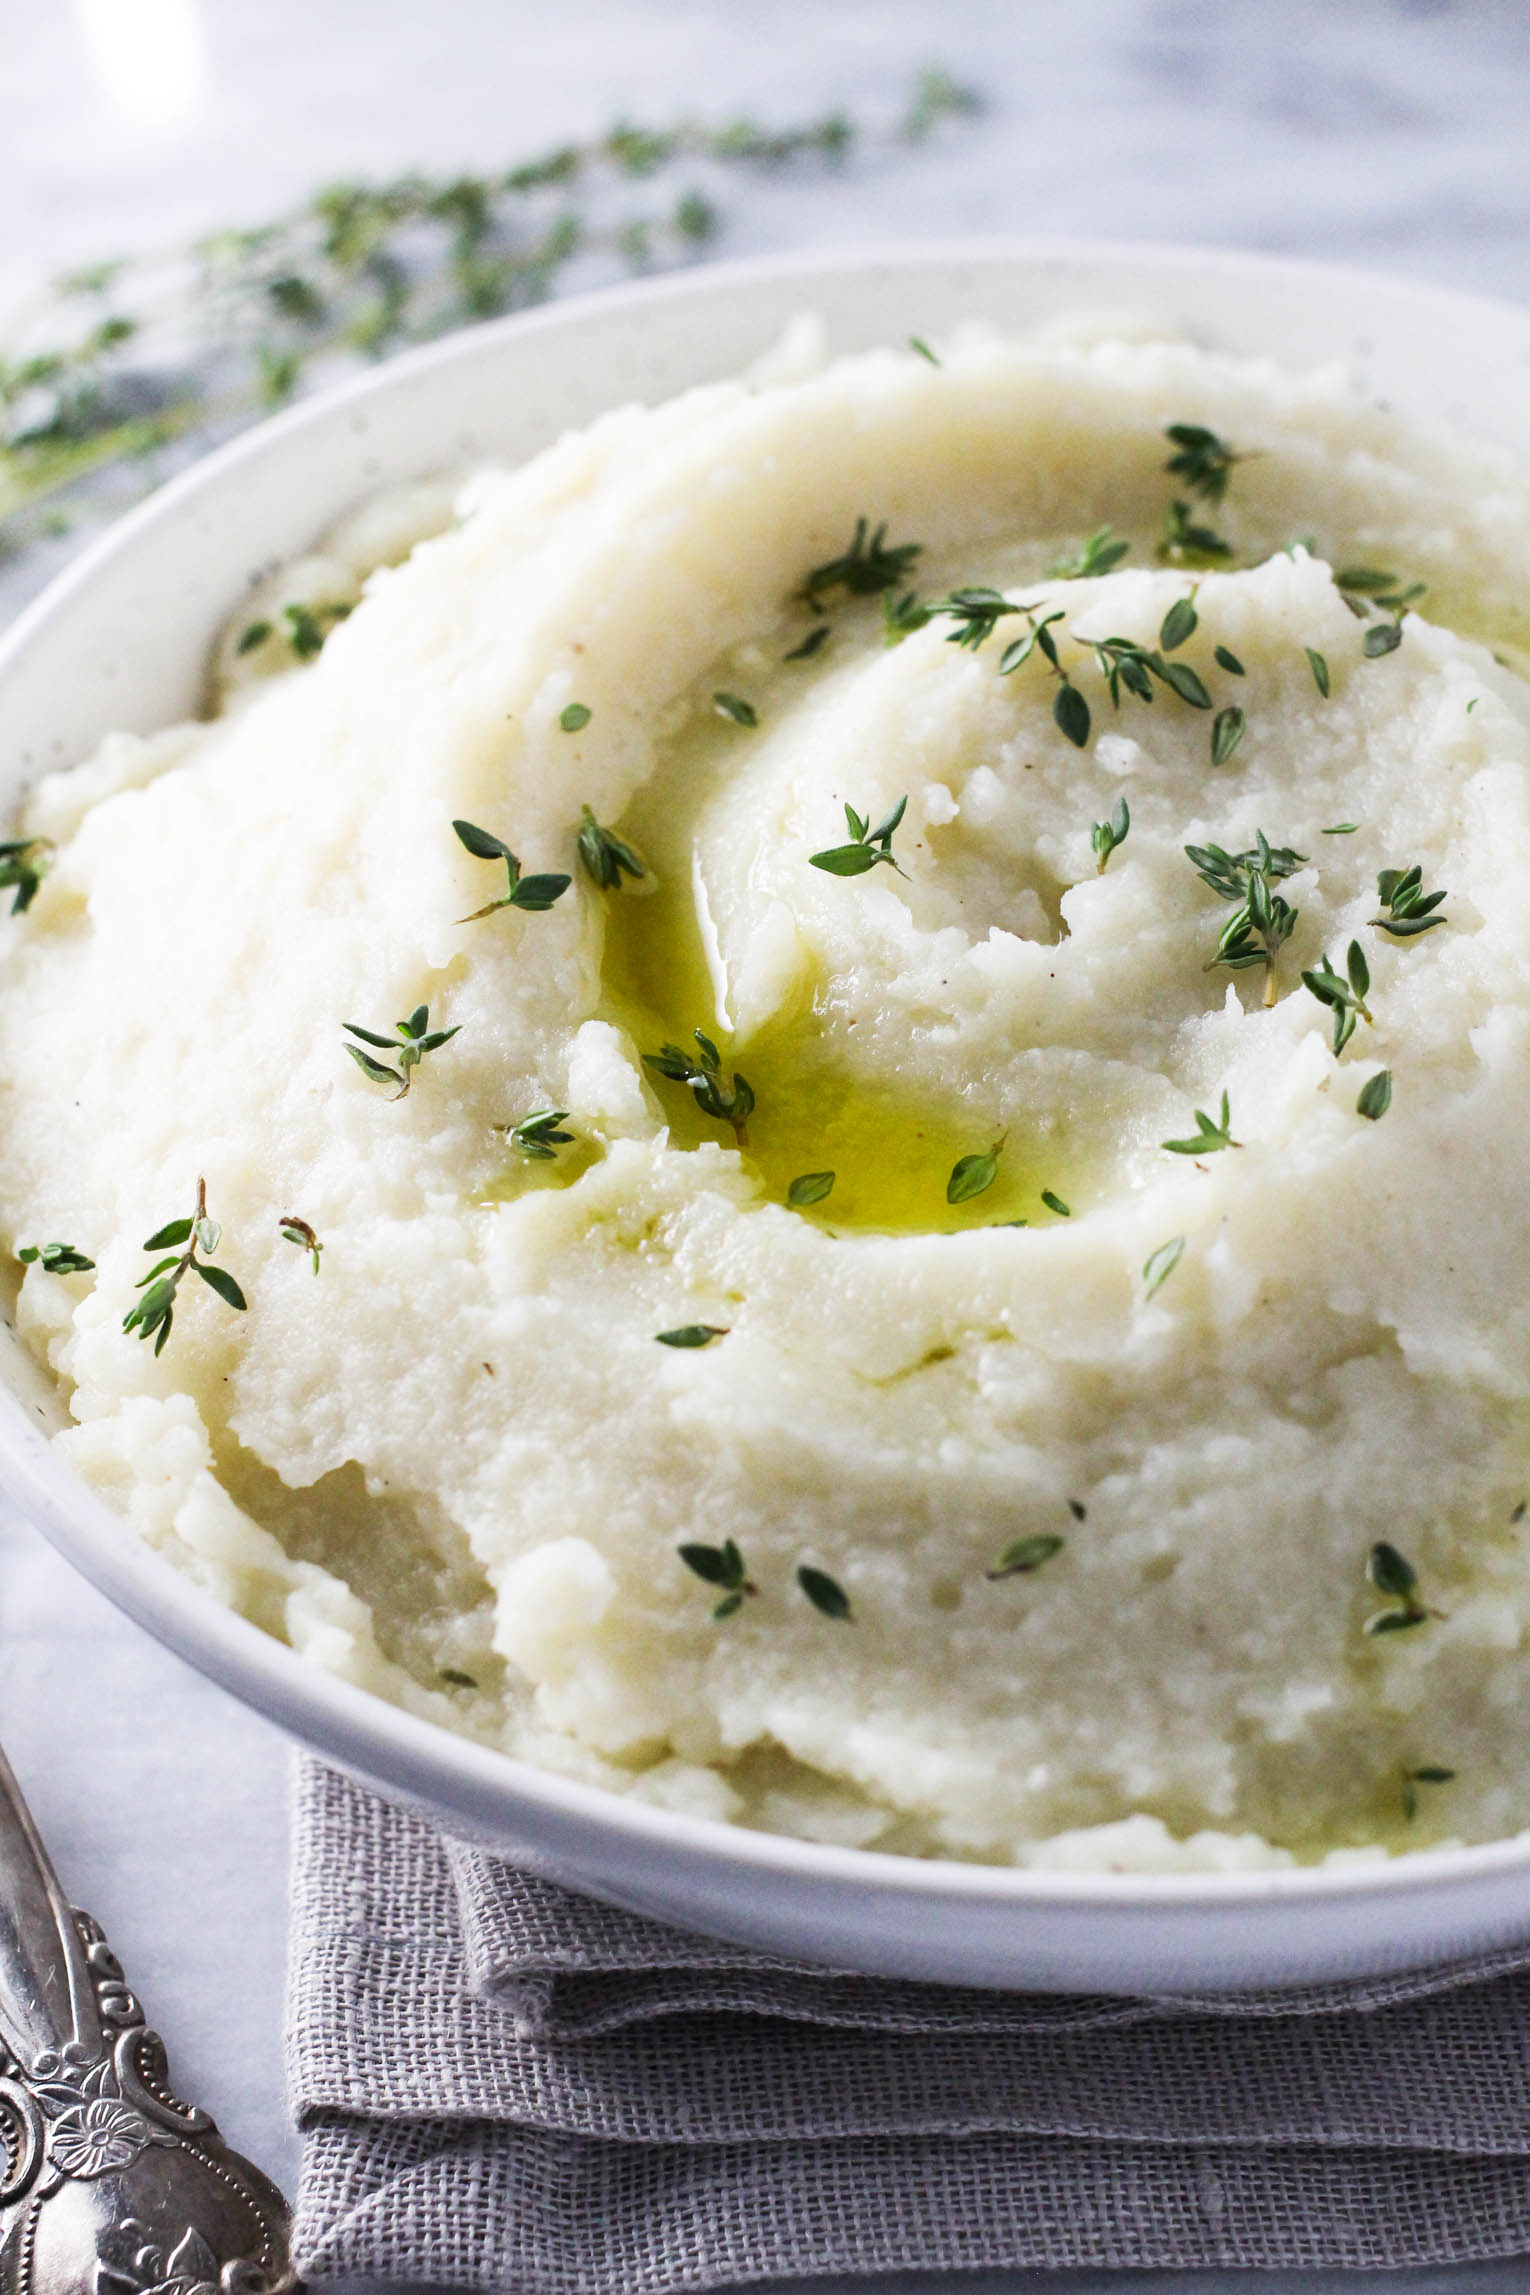 Mashed potatoes and cauliflower in awhite bowl standing on a napkin. The mash is garnished with olive oil and fresh thyme leaves.